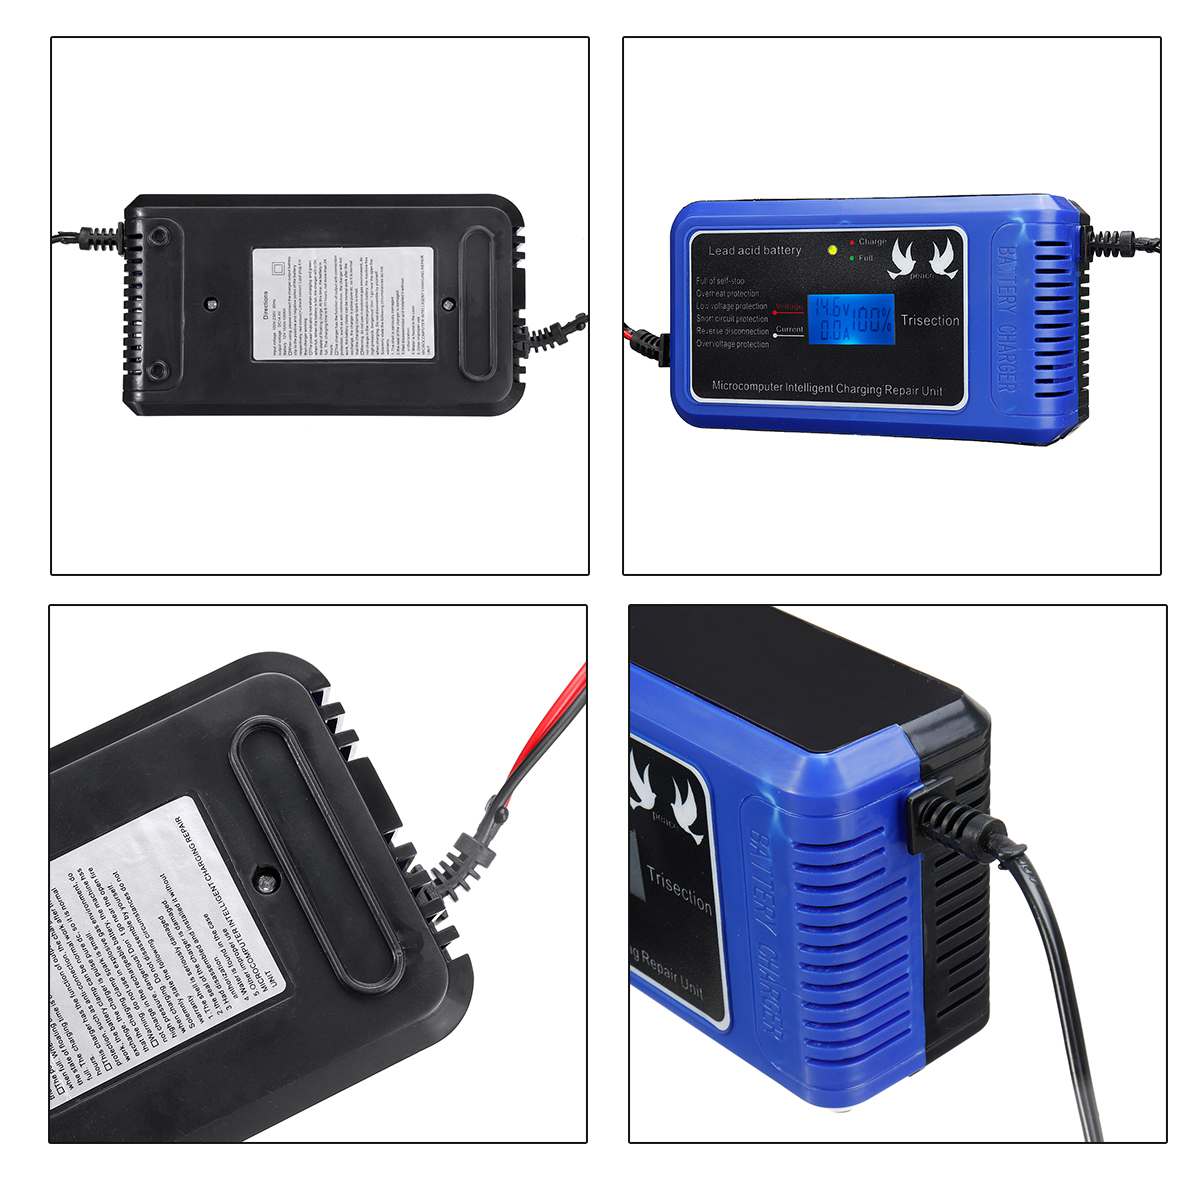 LCD Display Full Automatic Car Battery Charger 110V-230V To 12V 10A Smart Fast Power Charging for Car Motorcycle US/EU Plug